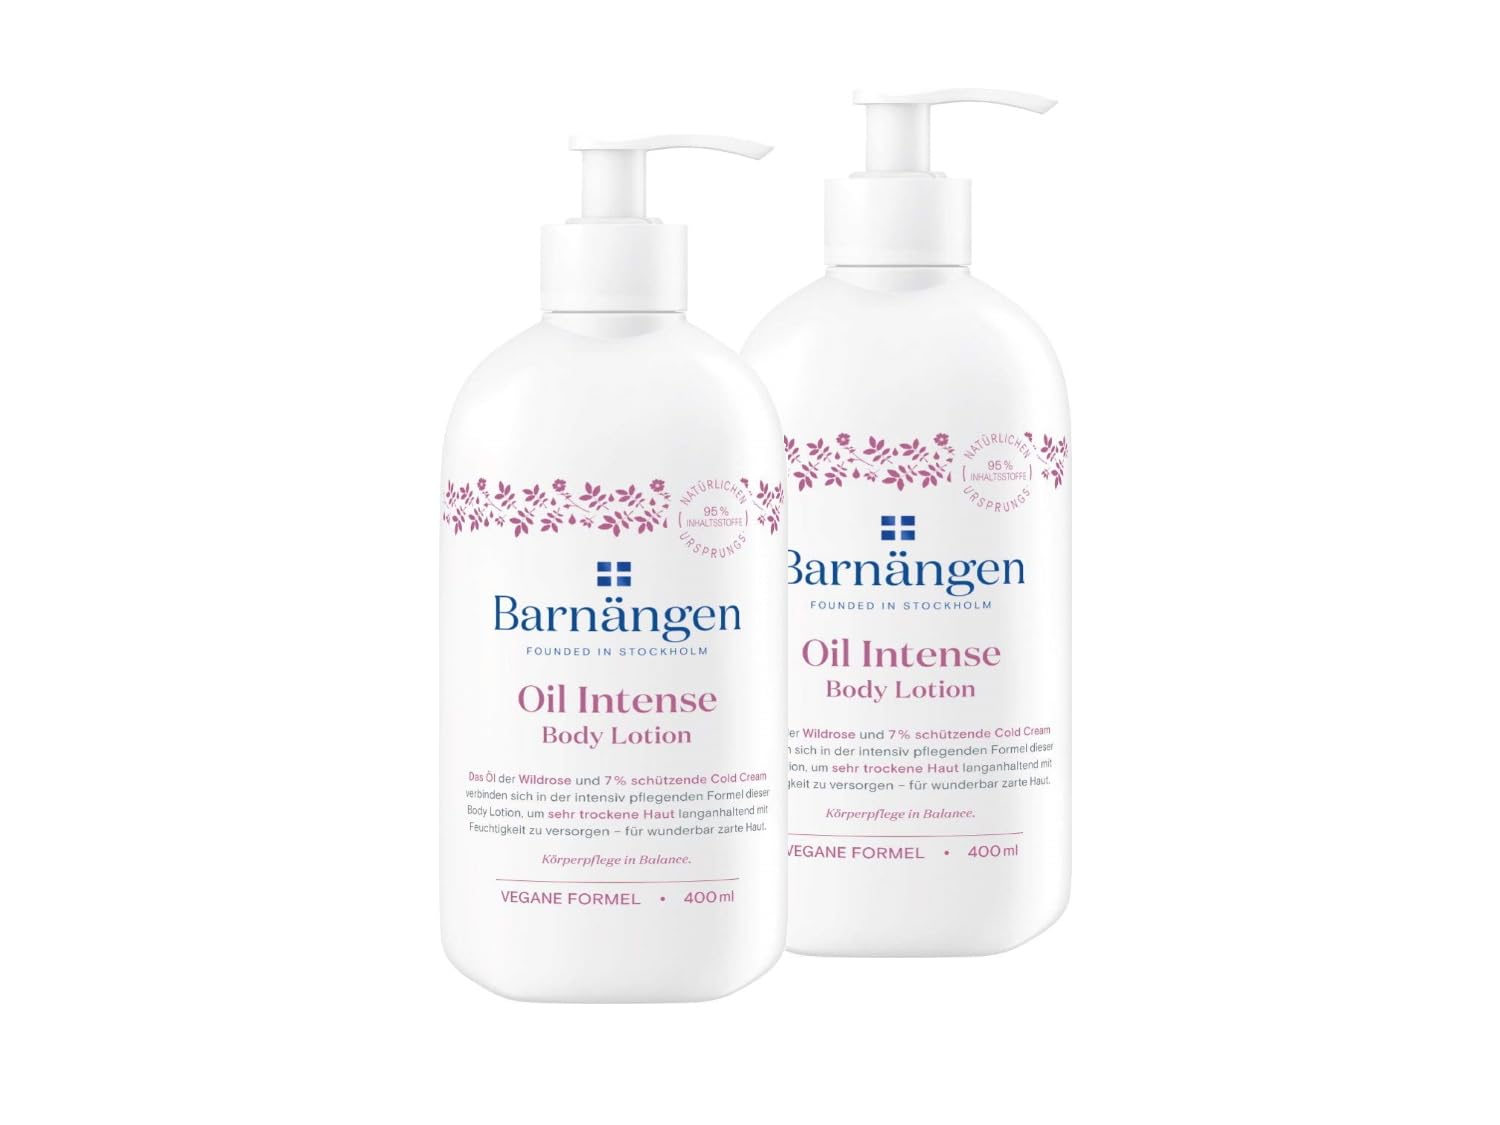 Barnängen Body Lotion Oil Intense, 2 x 400 ml, with Cold Cream and Rose Petal Fragrance, for Dry to Very Dry Skin, Veragen Formula, Dermatologically Tested